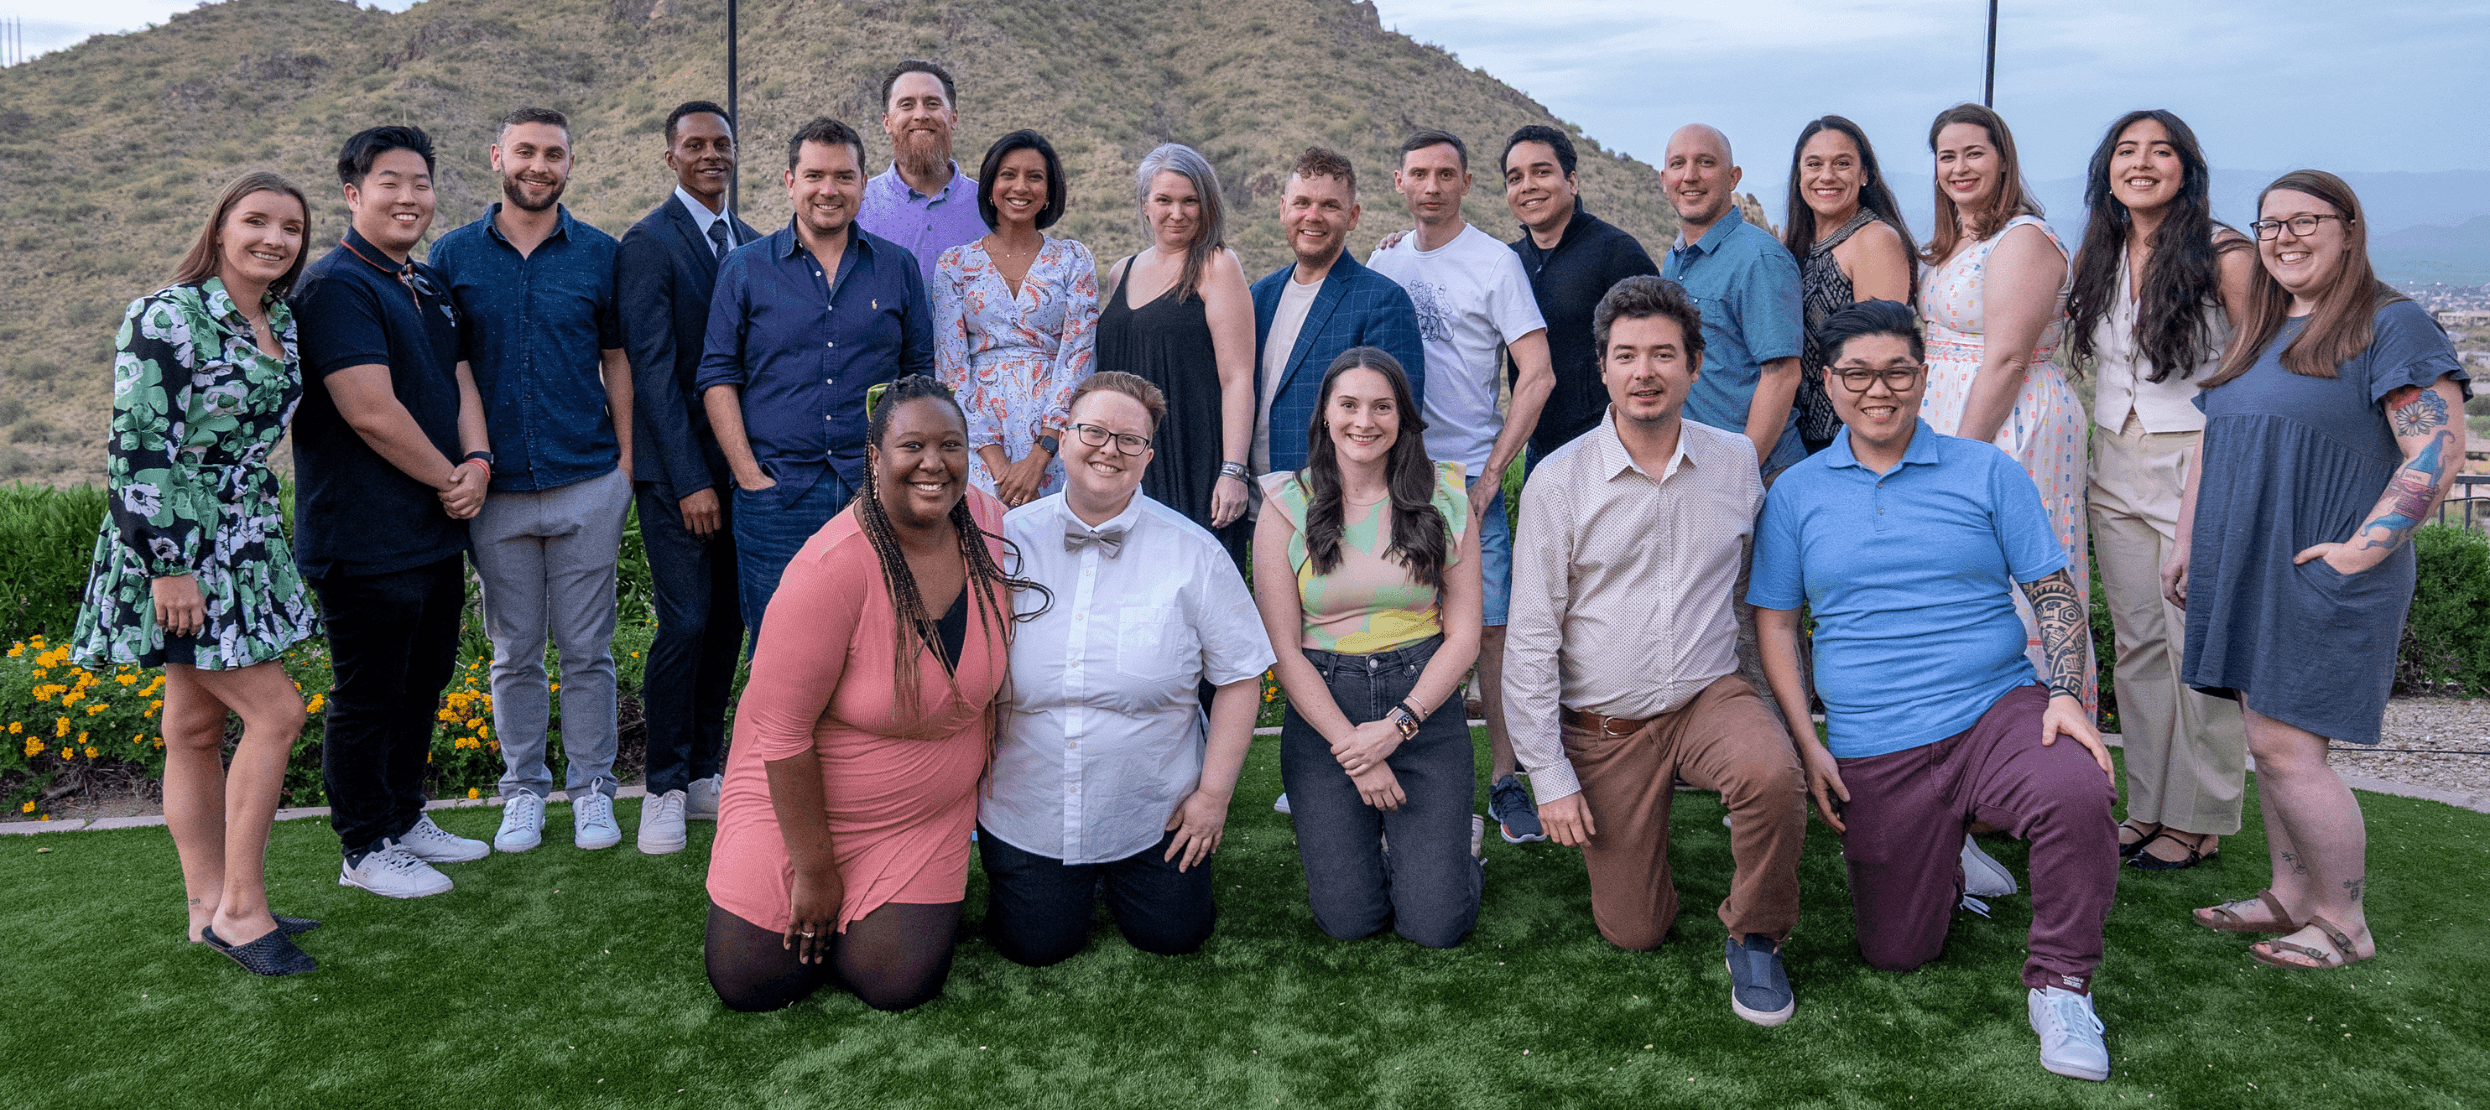 EasyLlama's Adventure in Scottsdale: A Retreat to Recharge and Build Team Culture